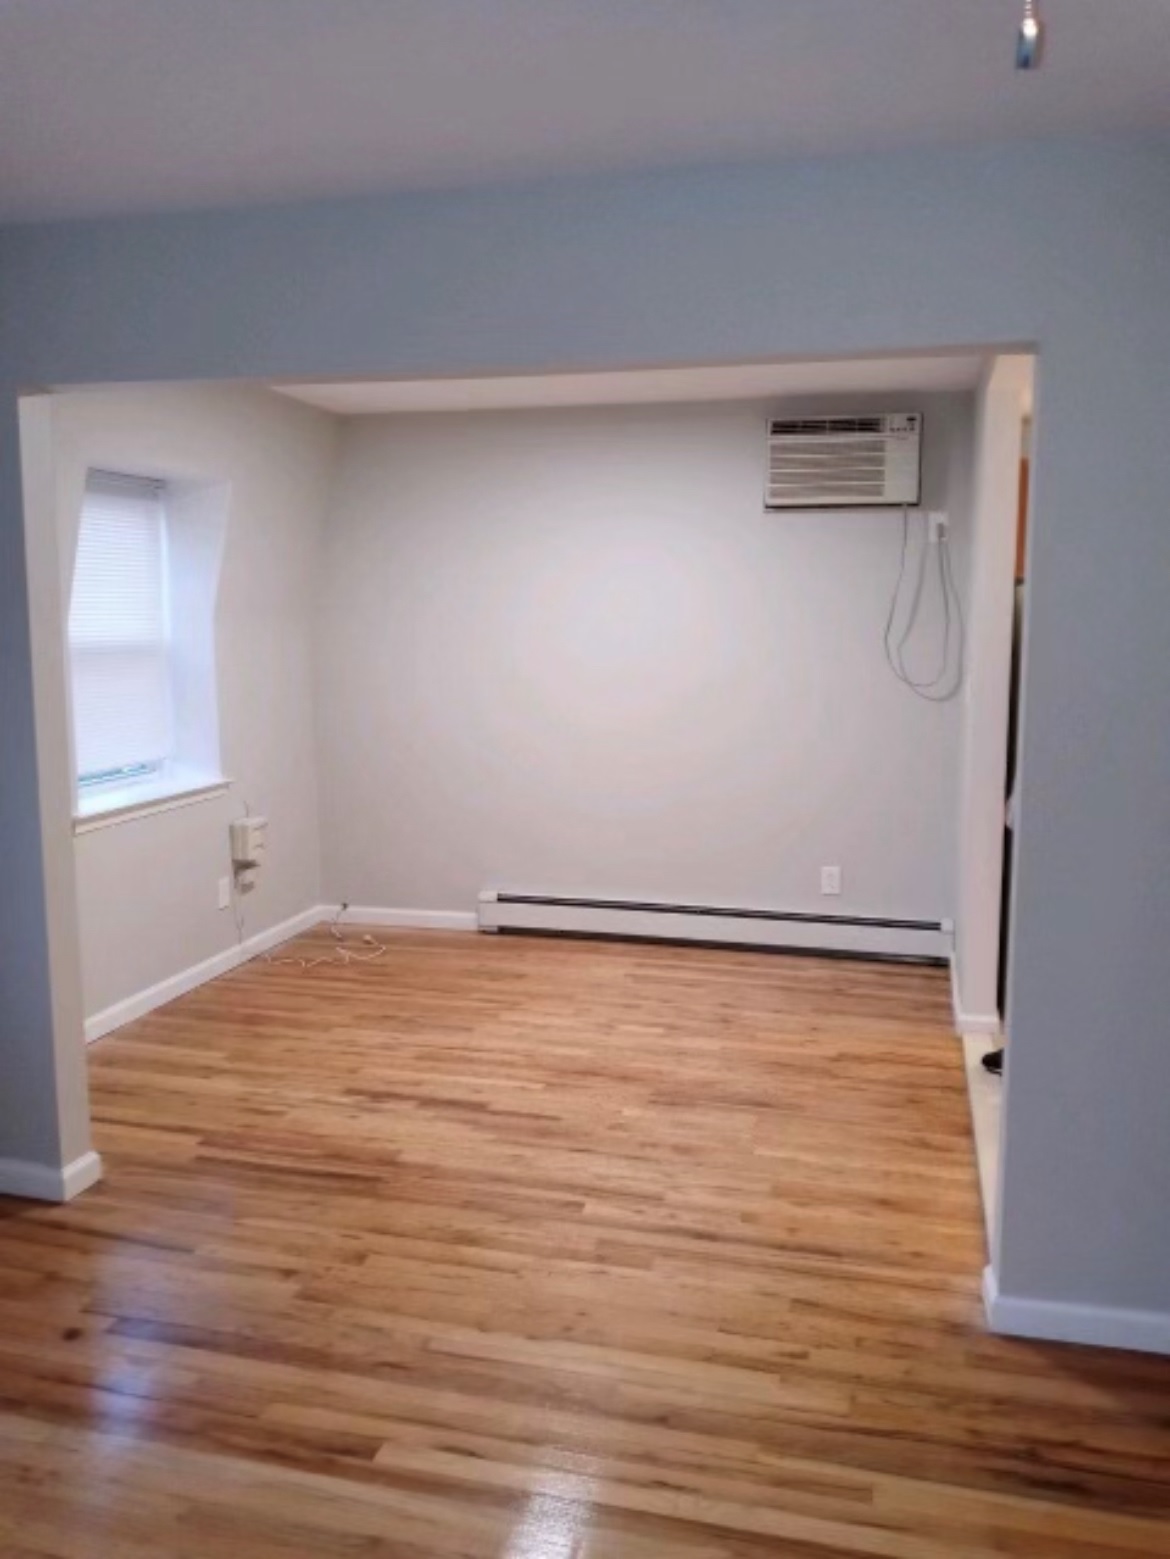 Beautiful Updated 3 Bedroom, 2 Bathroom Apt for Rent on 3rd Floor of 3 Family House. Features, Living room, Dining room, Eat-In-Kitchen, wood Floors Throughout. convenient to Buses, Shopping, Schools, Parks and Major Highways.